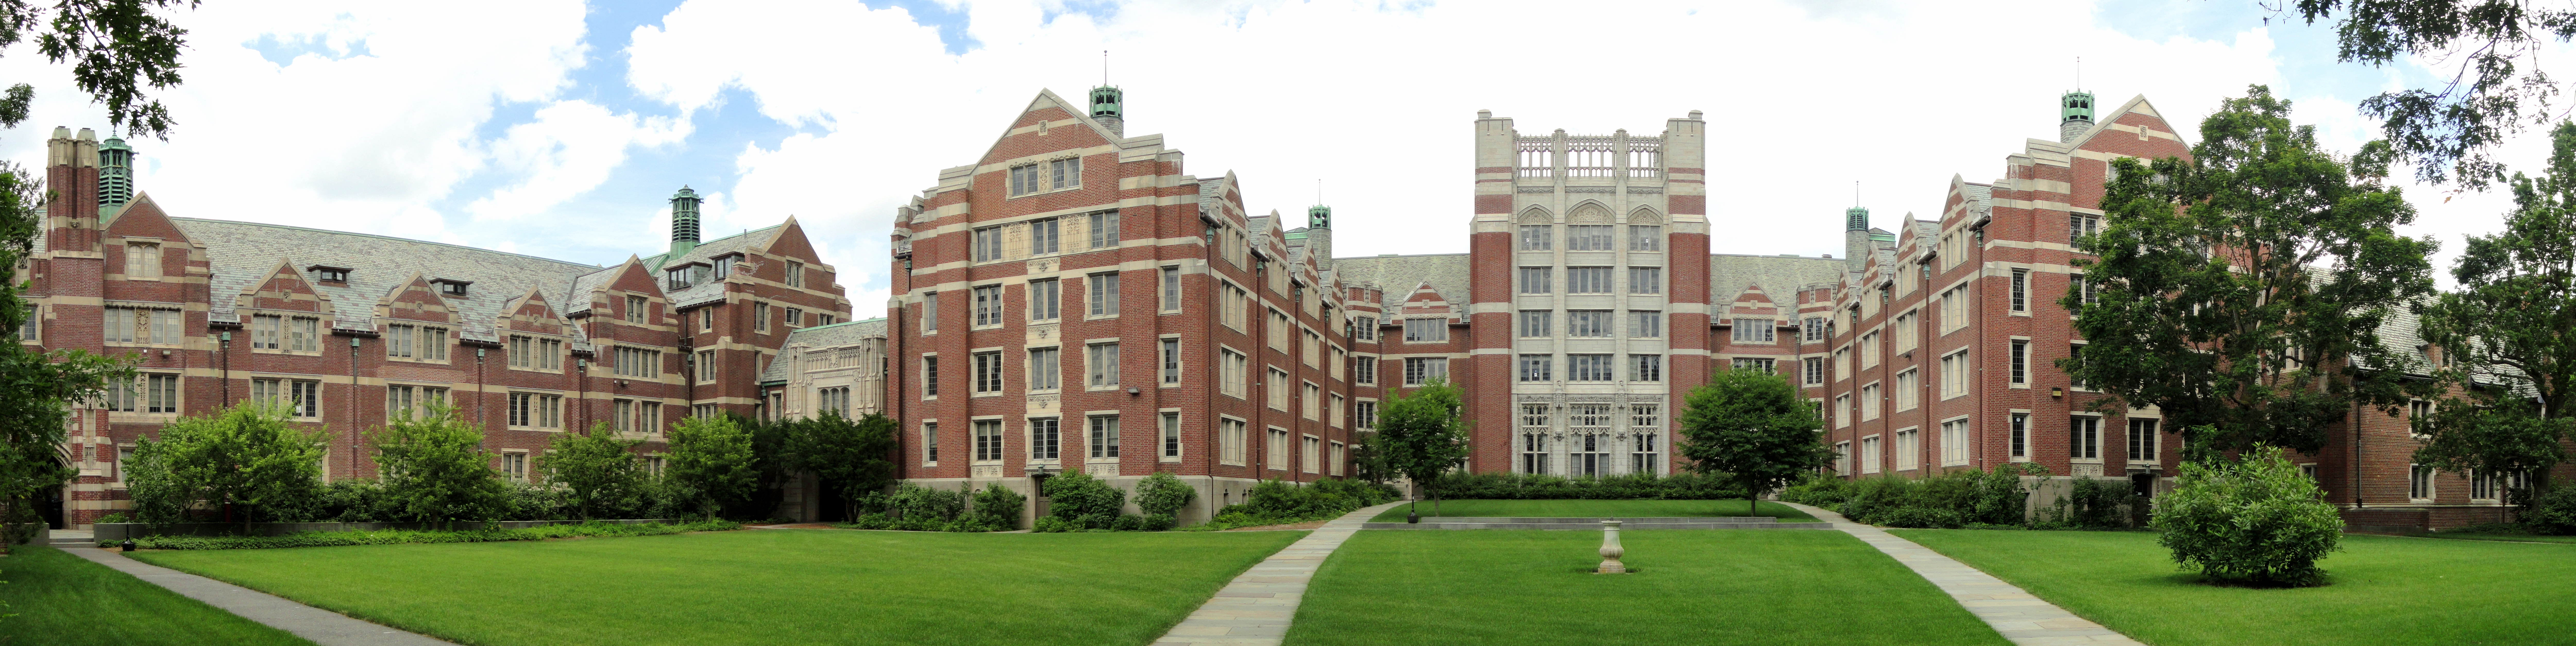 Tower_Court_complex_panorama_-_Wellesley_College.jpg